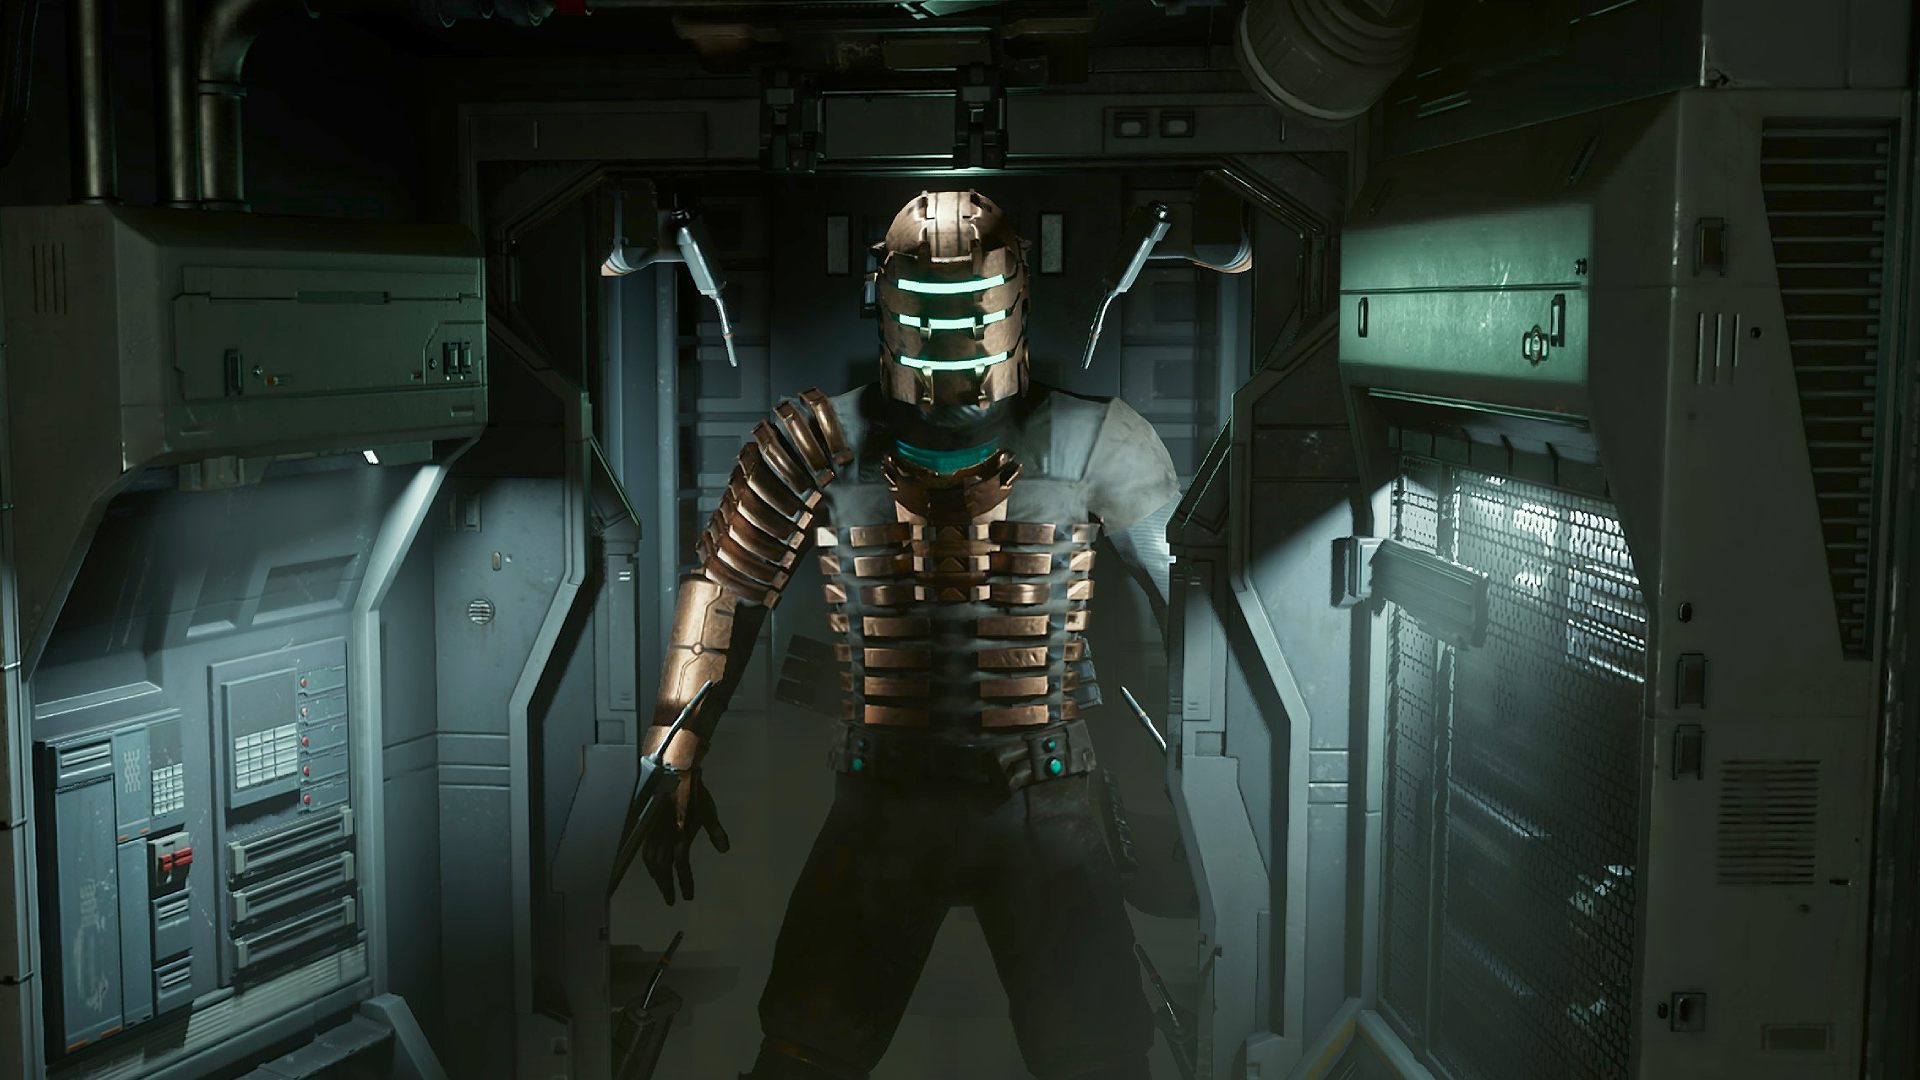 Dead Space review: one of the best survival horror games gets a